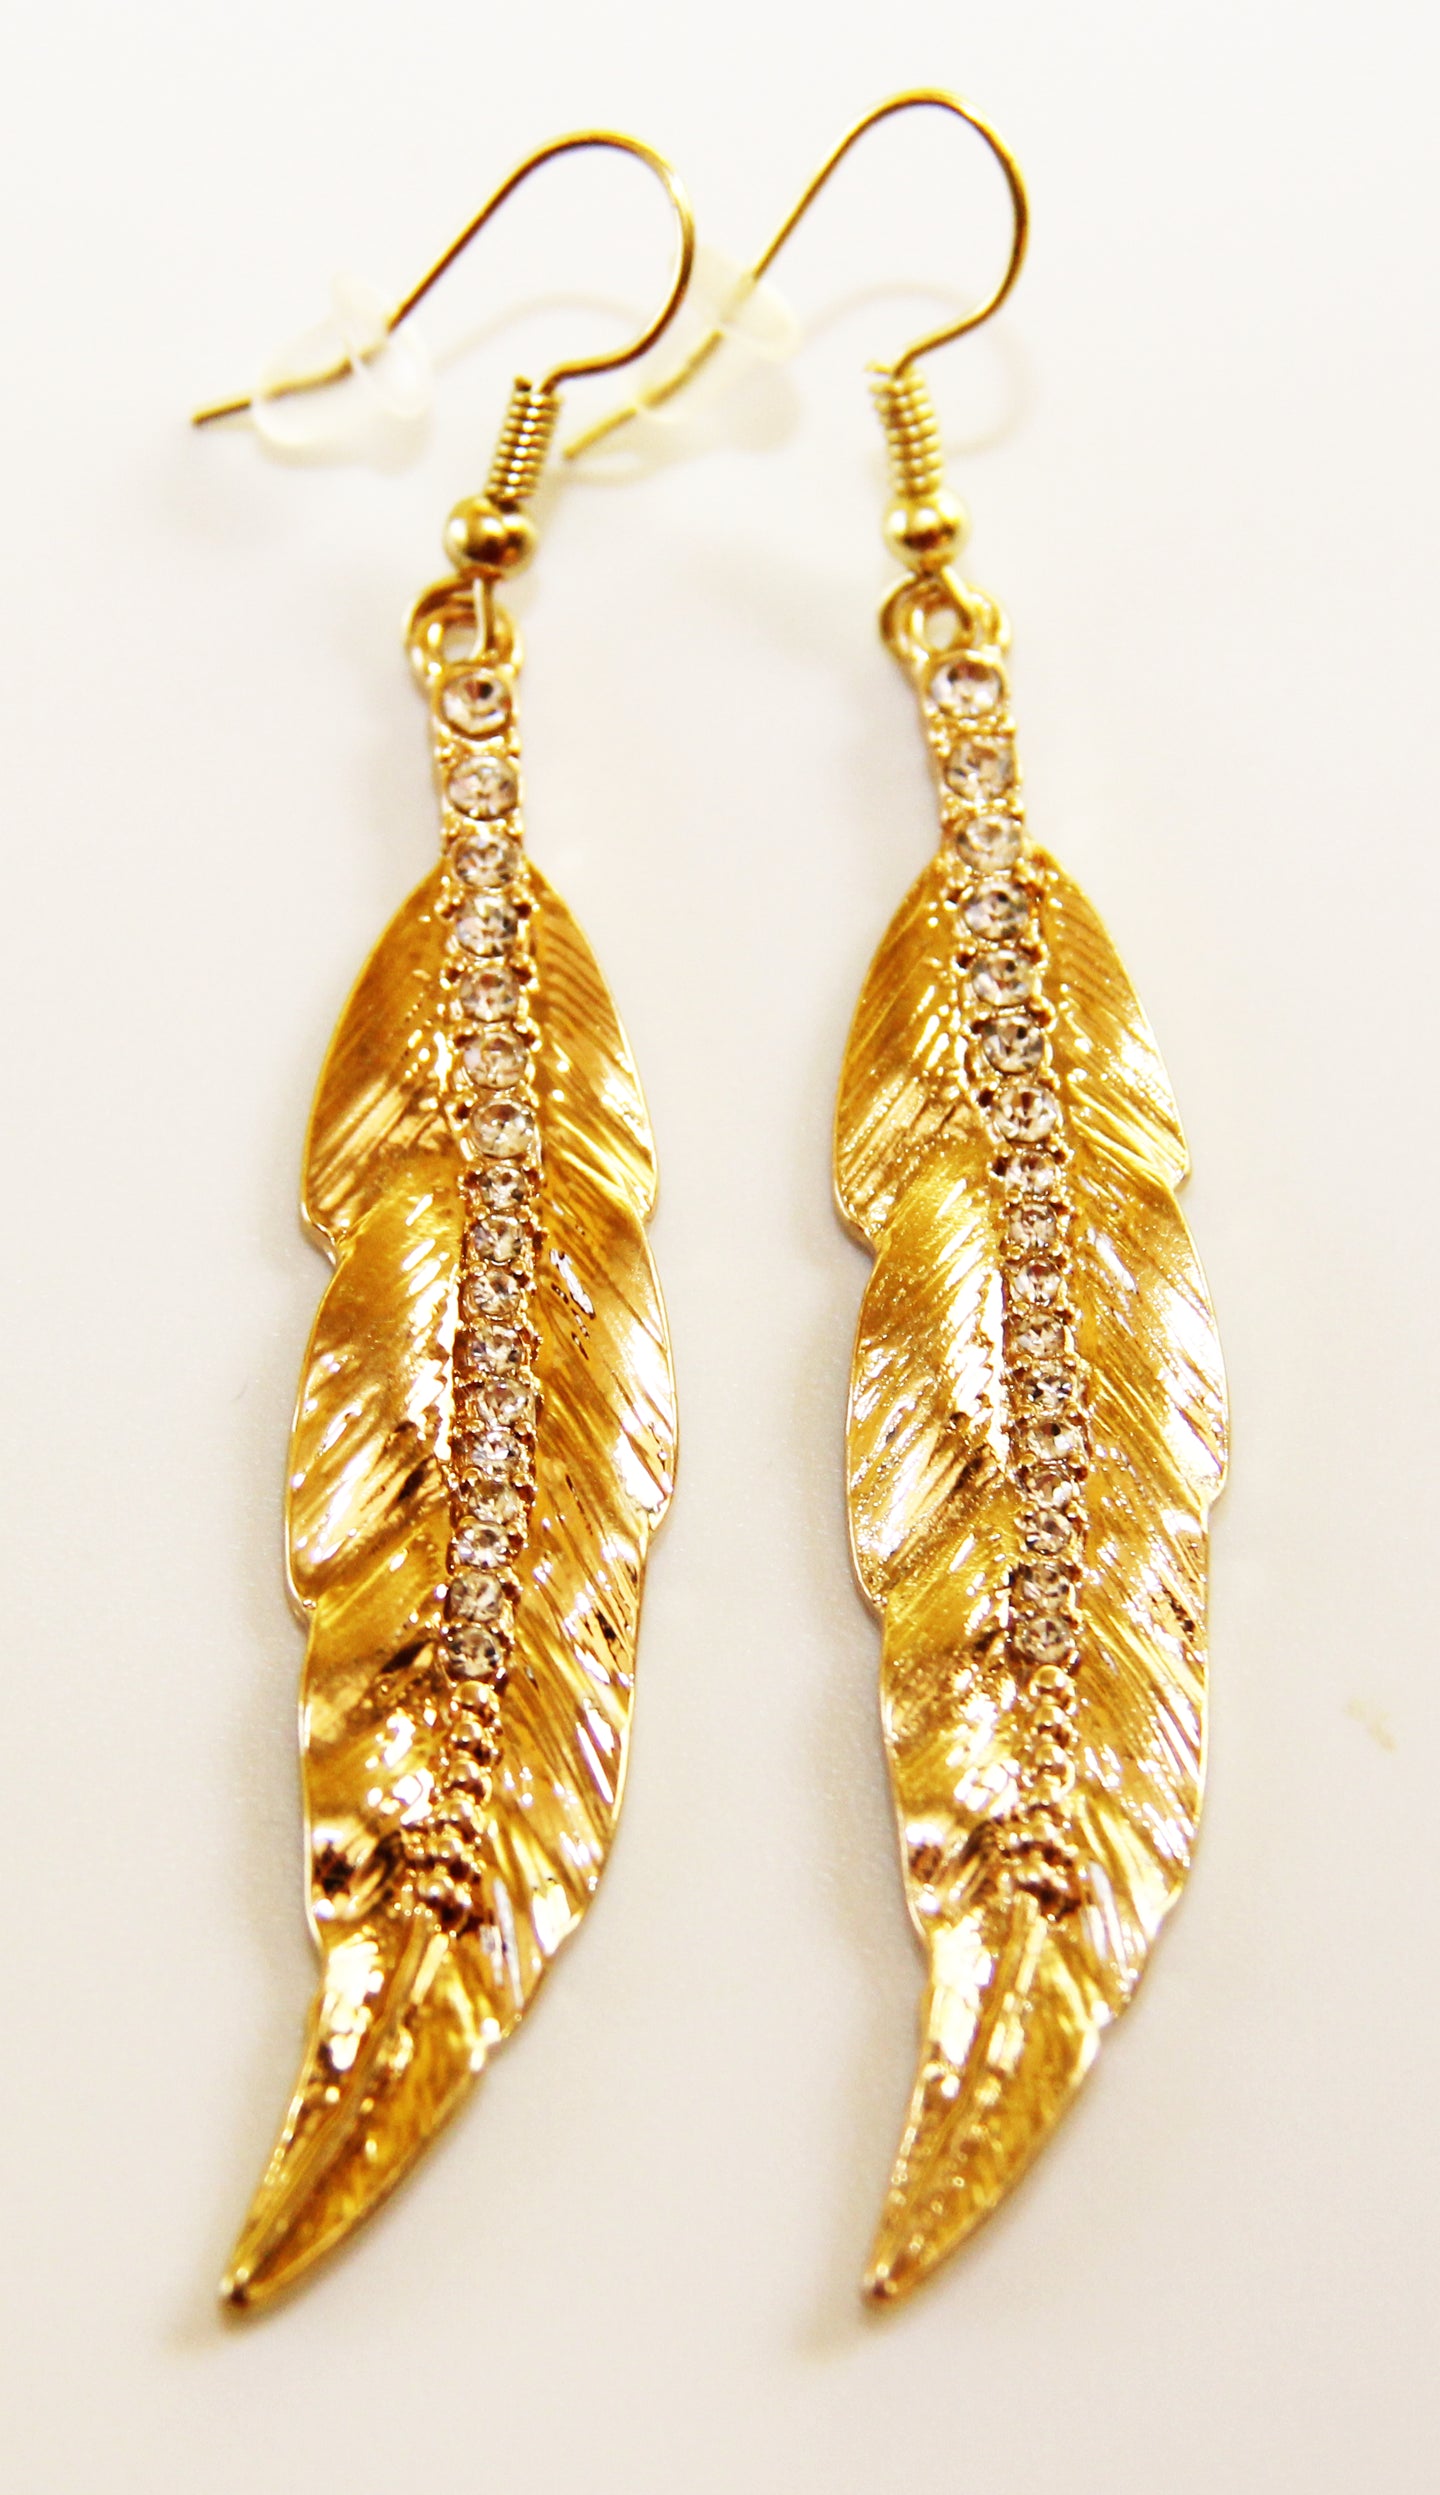 Gold Plated Feathers with Crystals Earrings